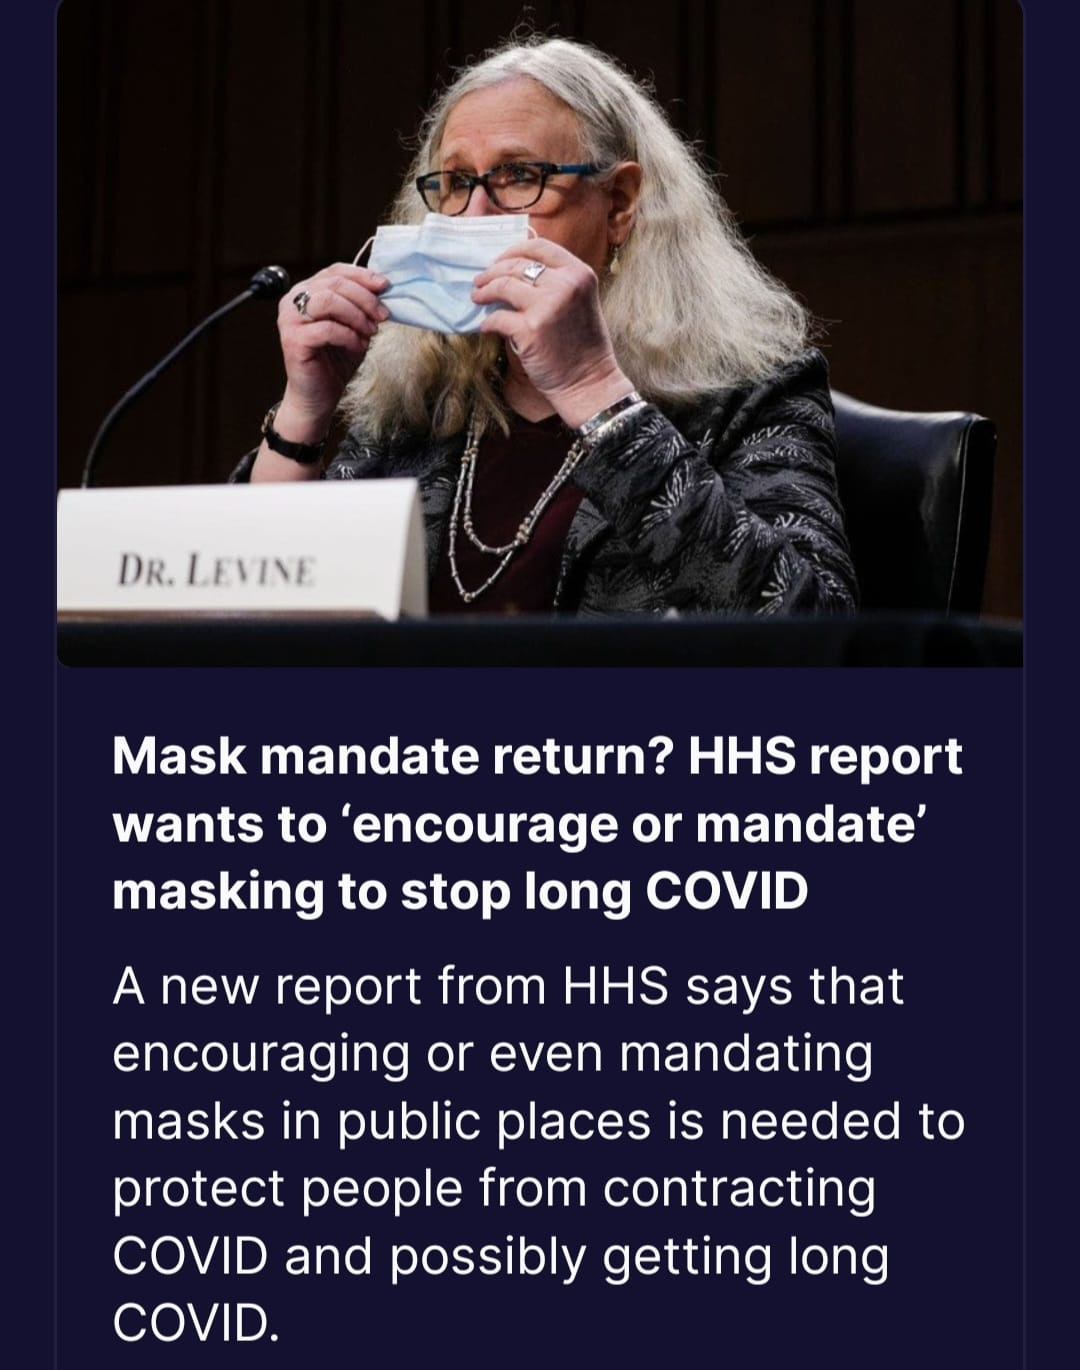 May be an image of 1 person and text that says 'DR.LEVINE DR. LEVINE Mask mandate return? HHS report wants to 'encourage or mandate' masking to stop long COVID A new report from HHS says that encouraging or even mandating masks in public places iS n”eded protect people from contracting COVID and possibly getting long COVID. to'